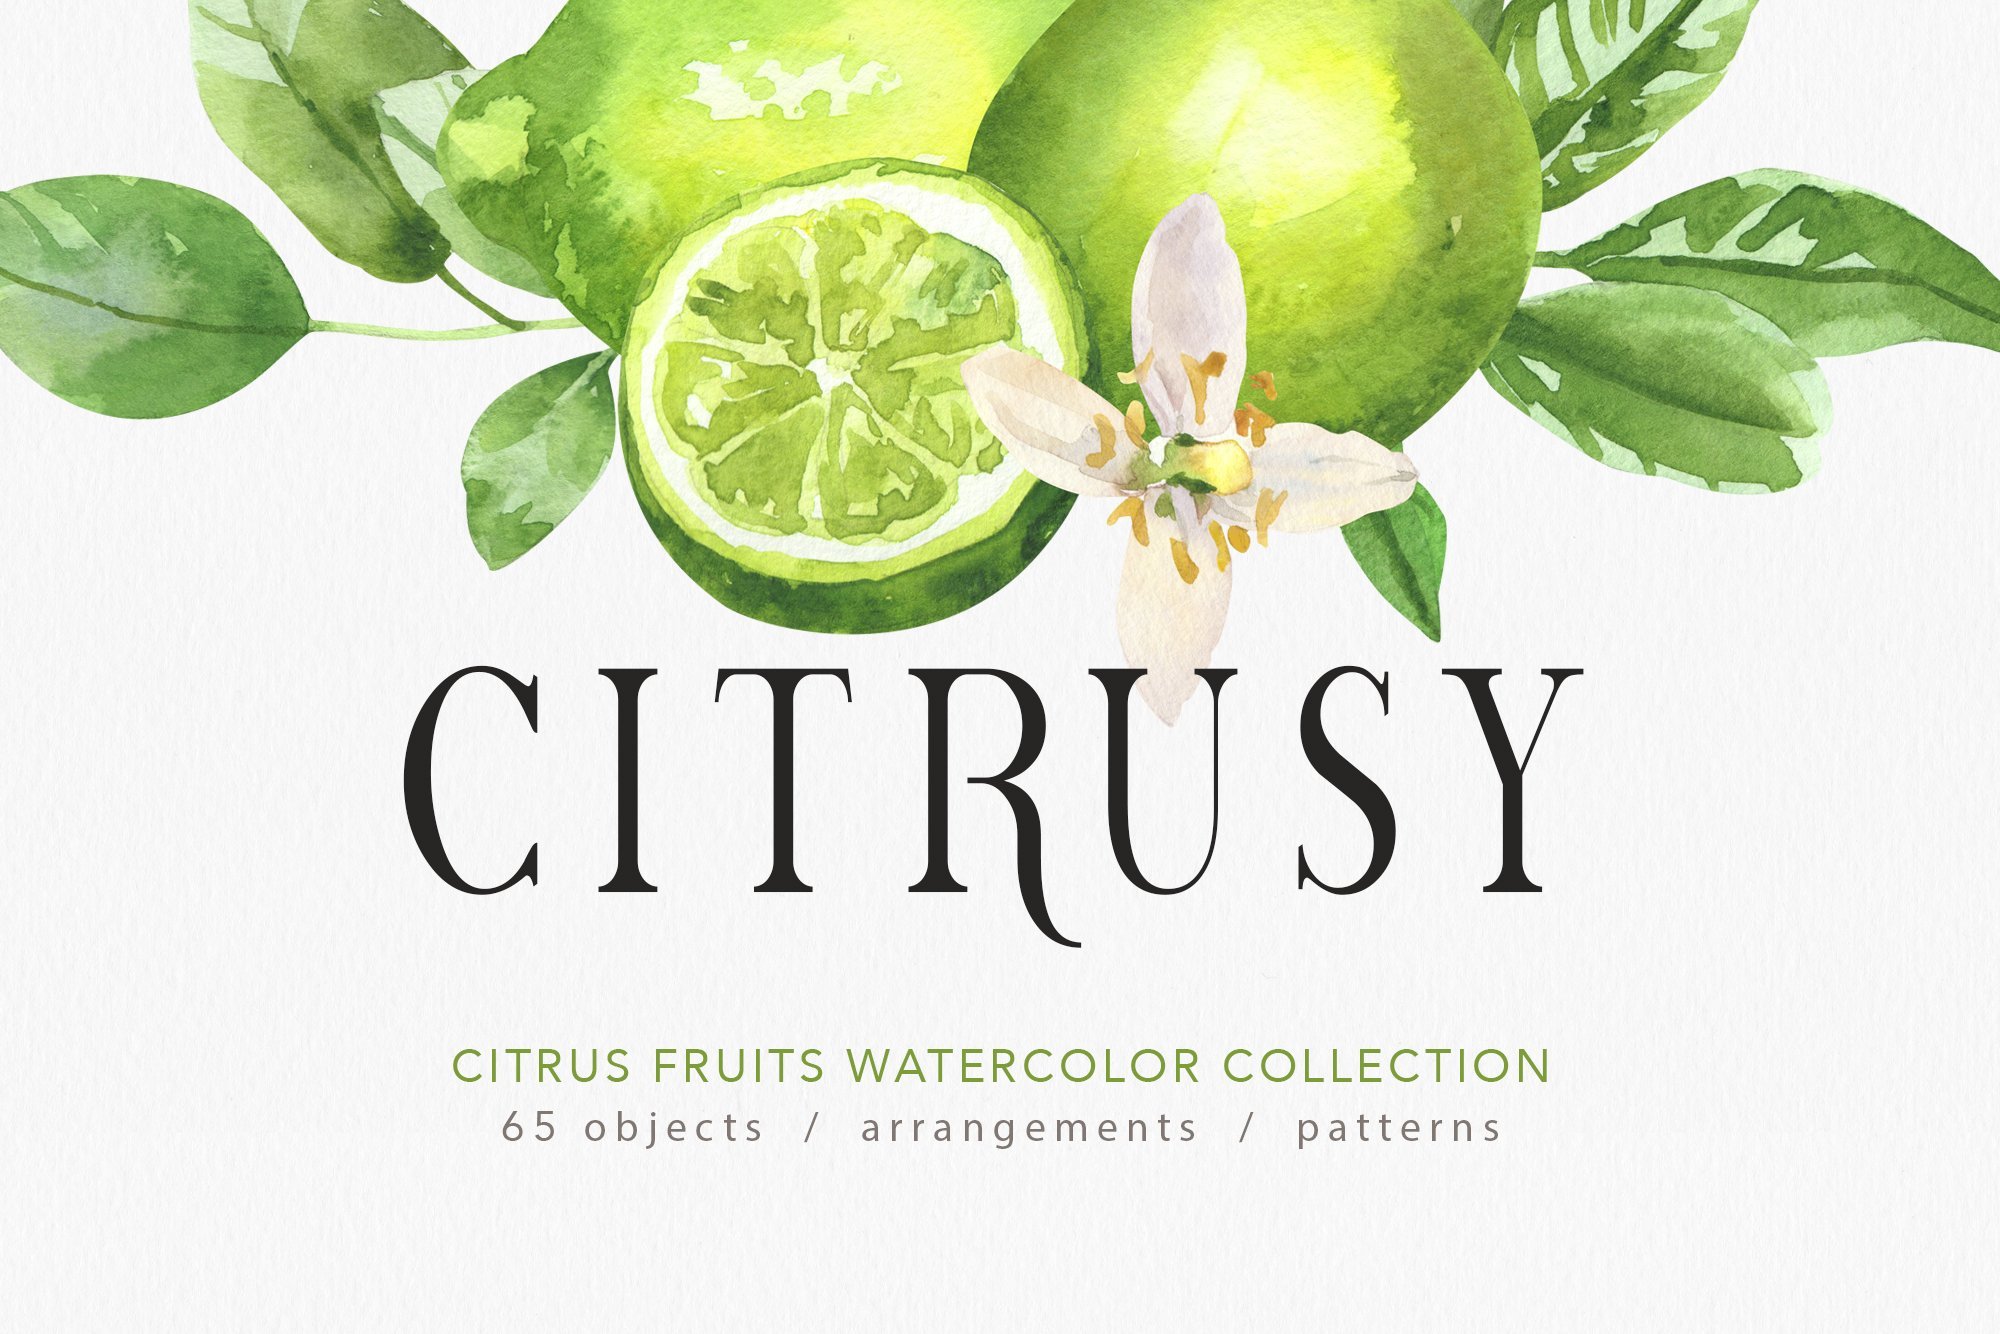 Citrusy Fruits watercolor collection cover image.